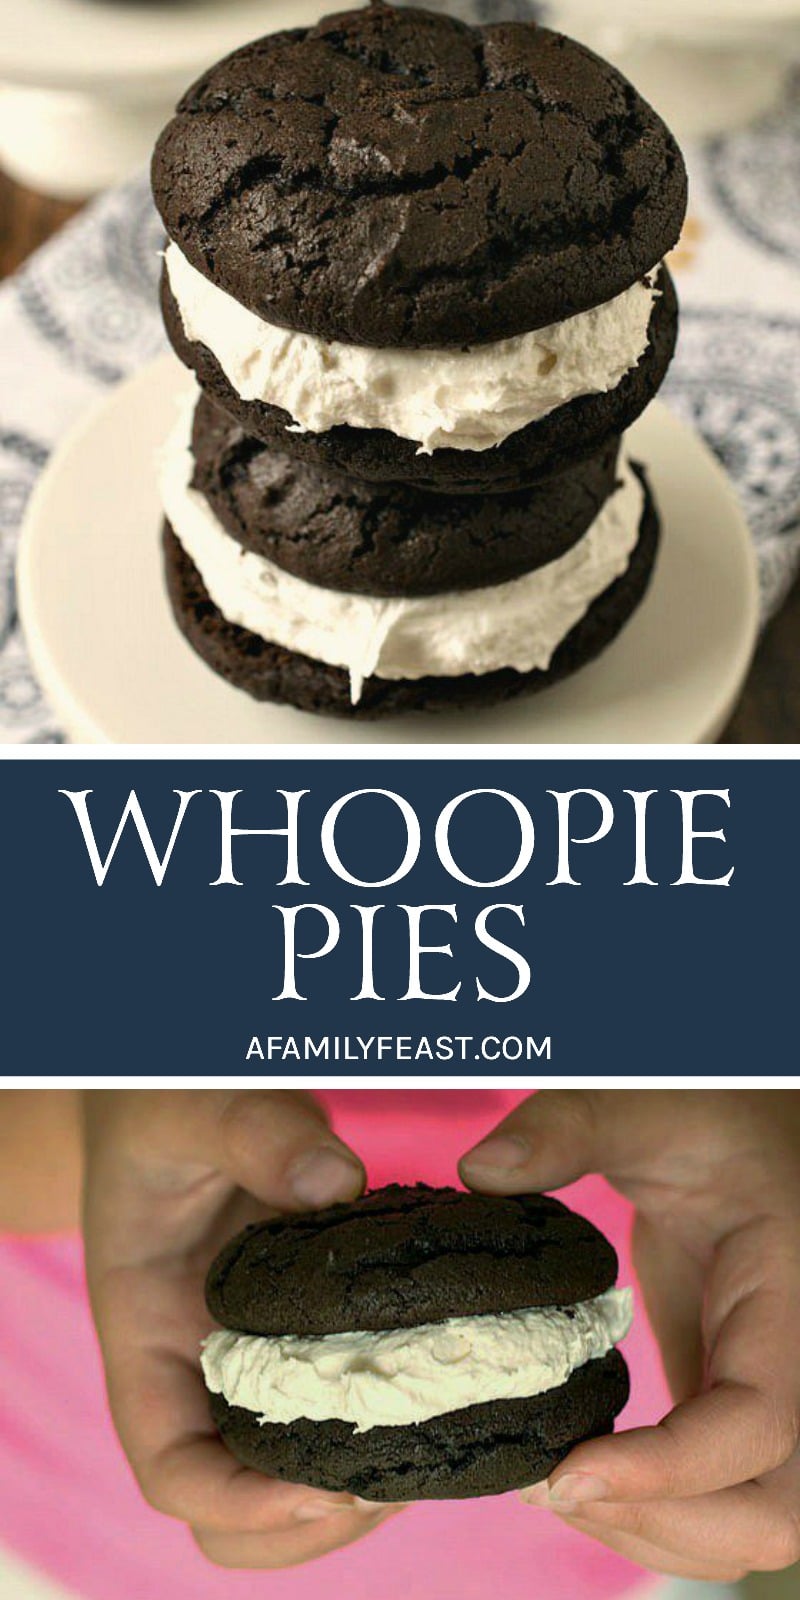 Whoopie Pies are a classic New England dessert. Fudgy chocolate cake sandwiching a creamy and sweet marshmallow filling. So good!